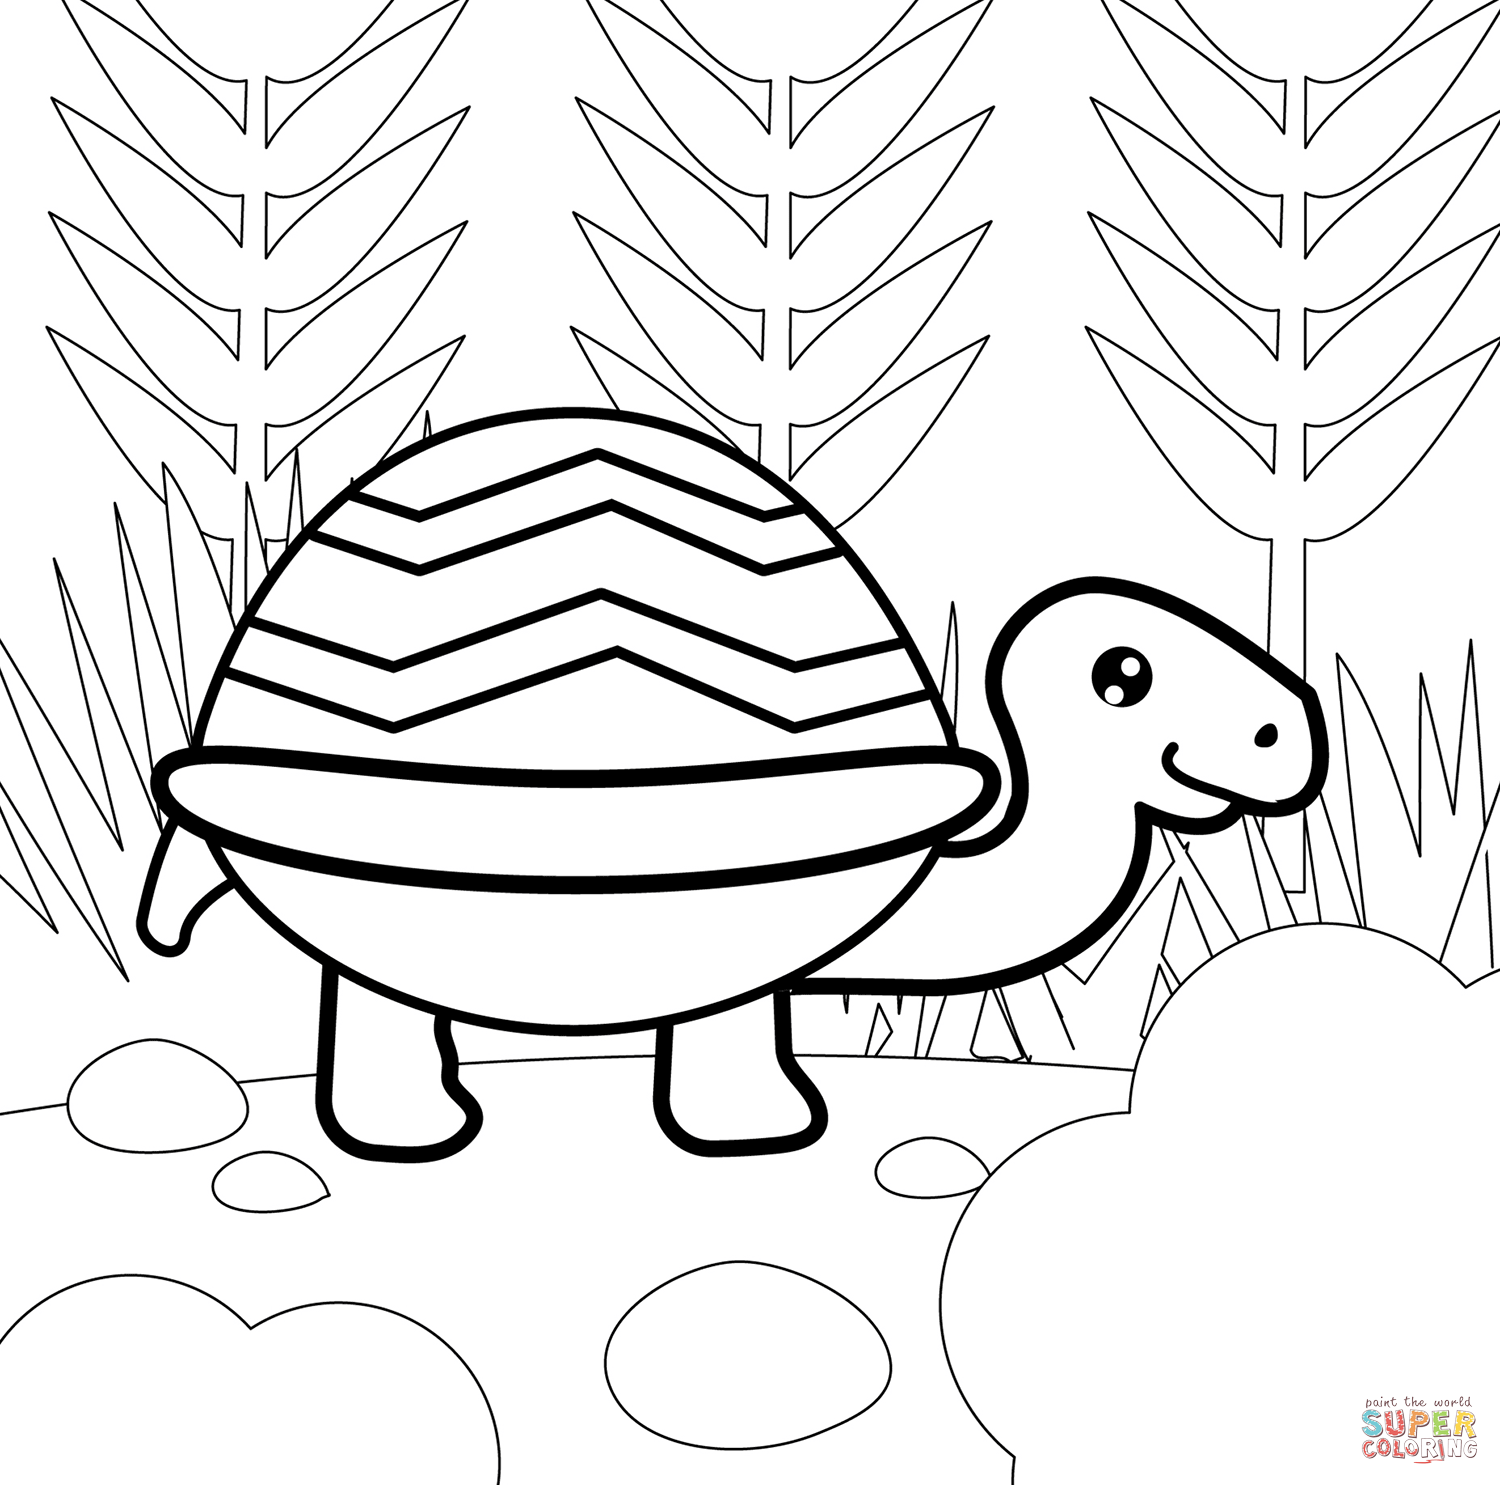 Turtle coloring page free printable coloring pages